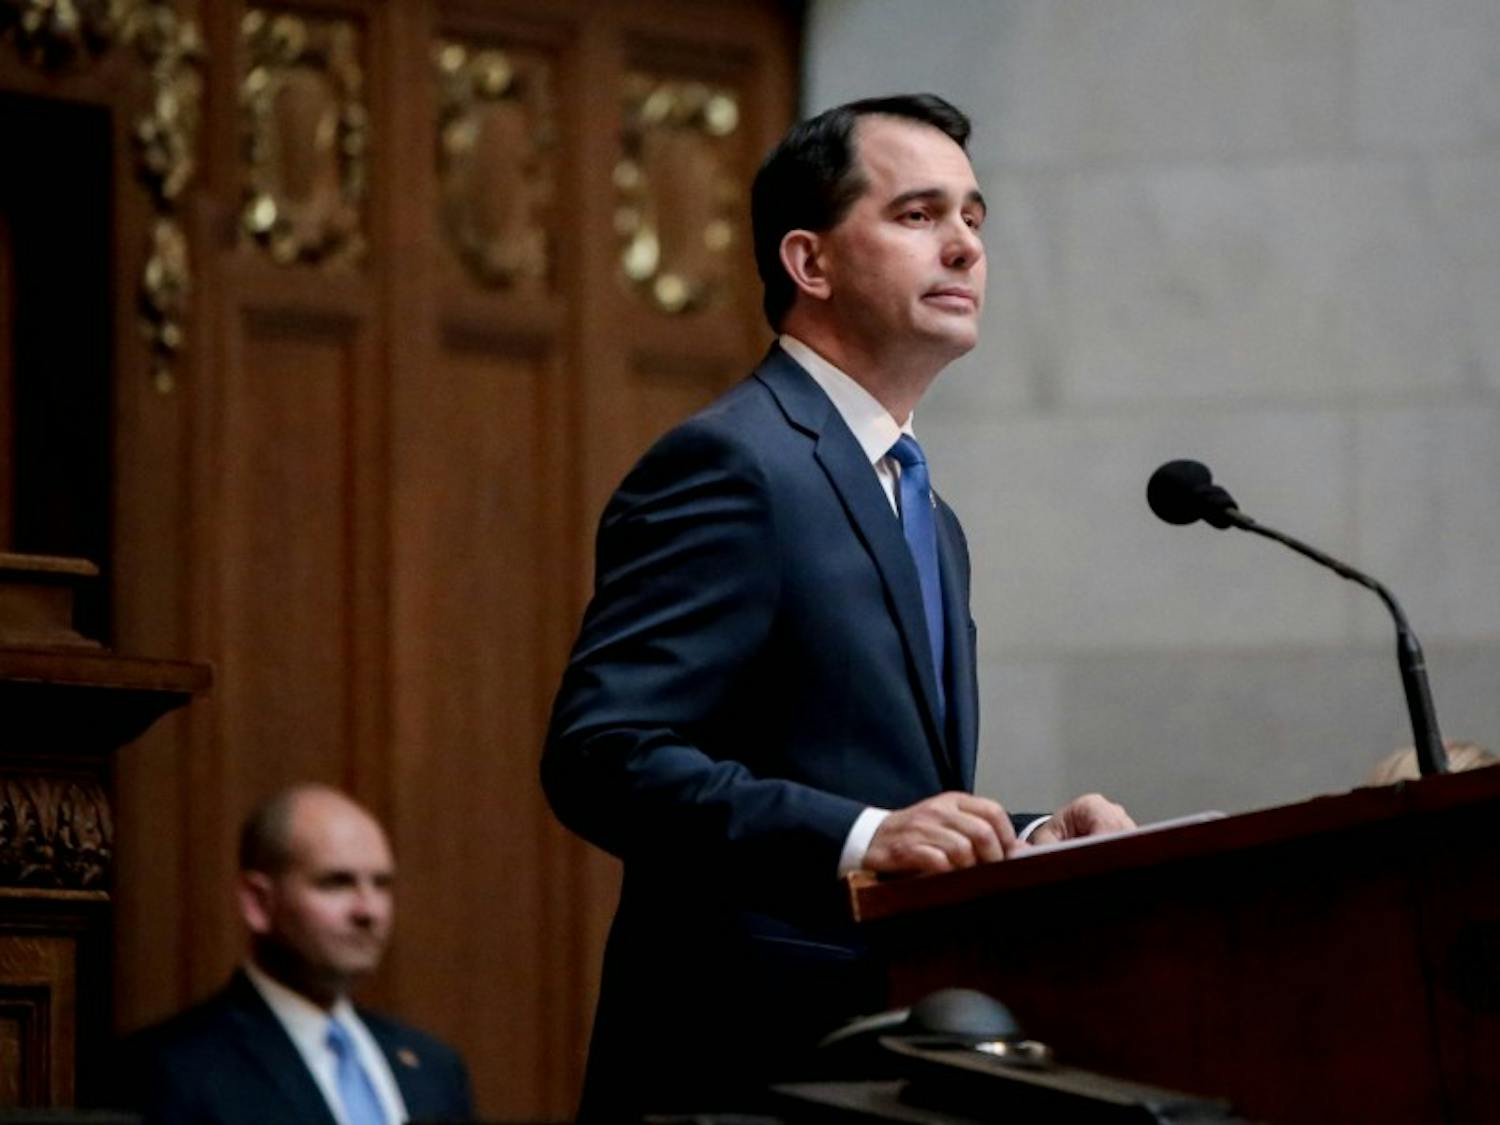 As Scott Walker was honored for his executive orders on government transparency, an open records advocacy group debated his record on the matter.